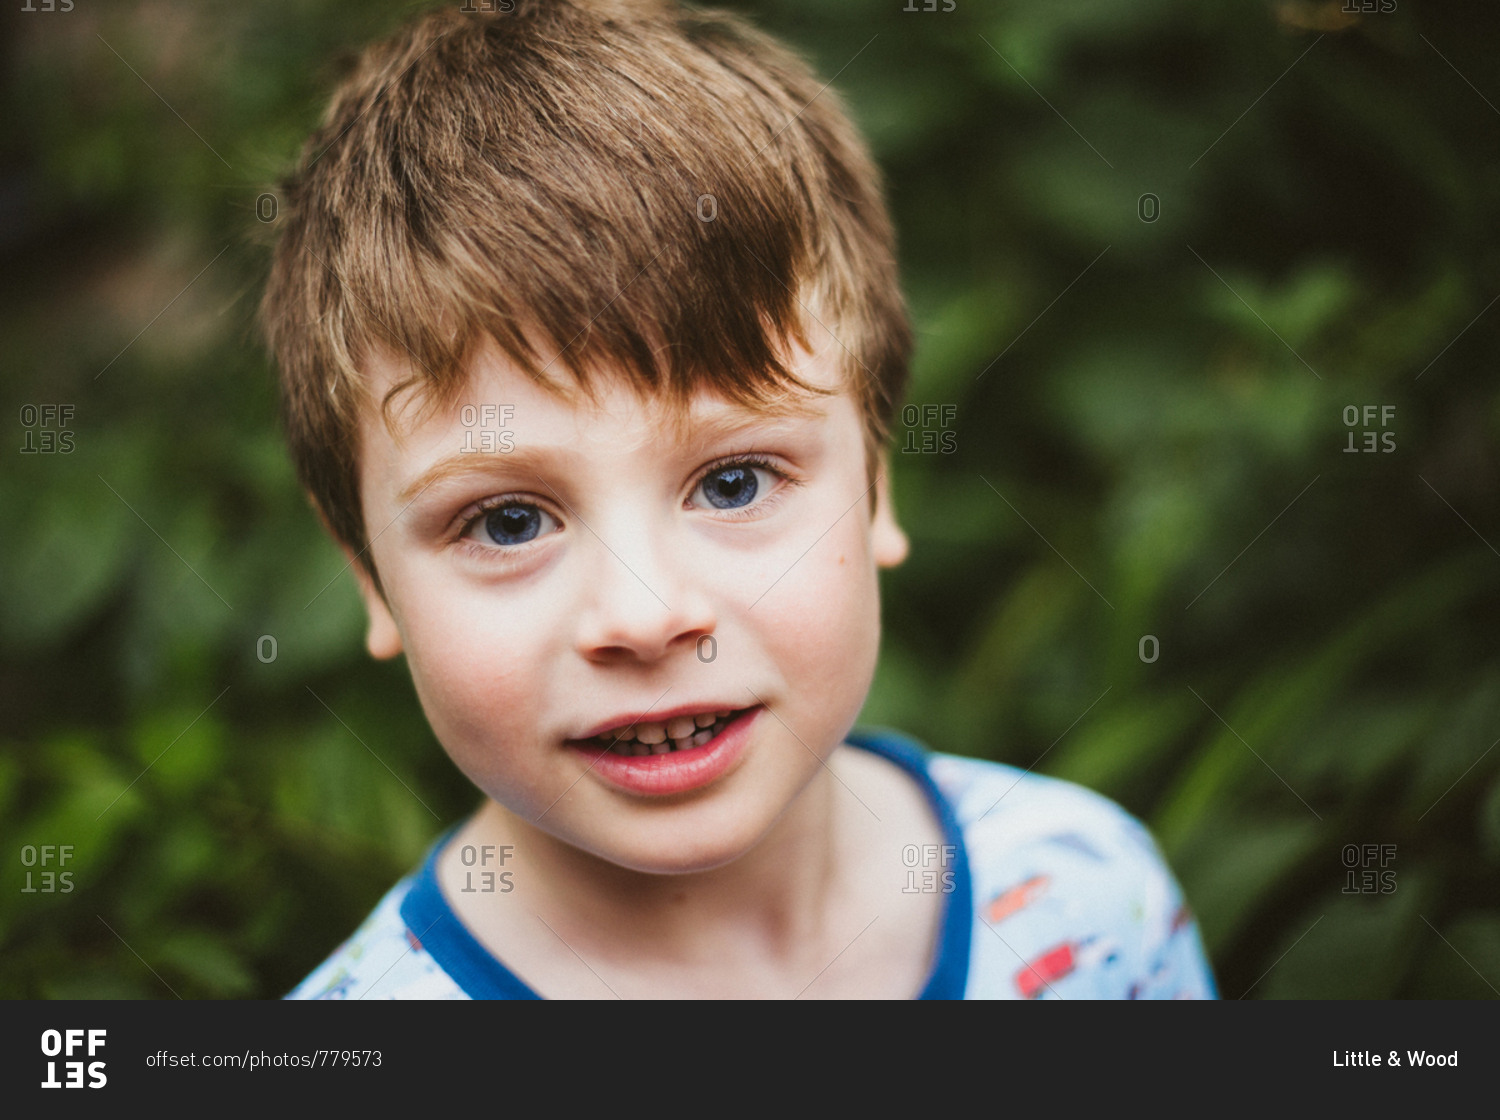 Portrait of a smiling boy with light brown hair and blue eyes stock photo -  OFFSET